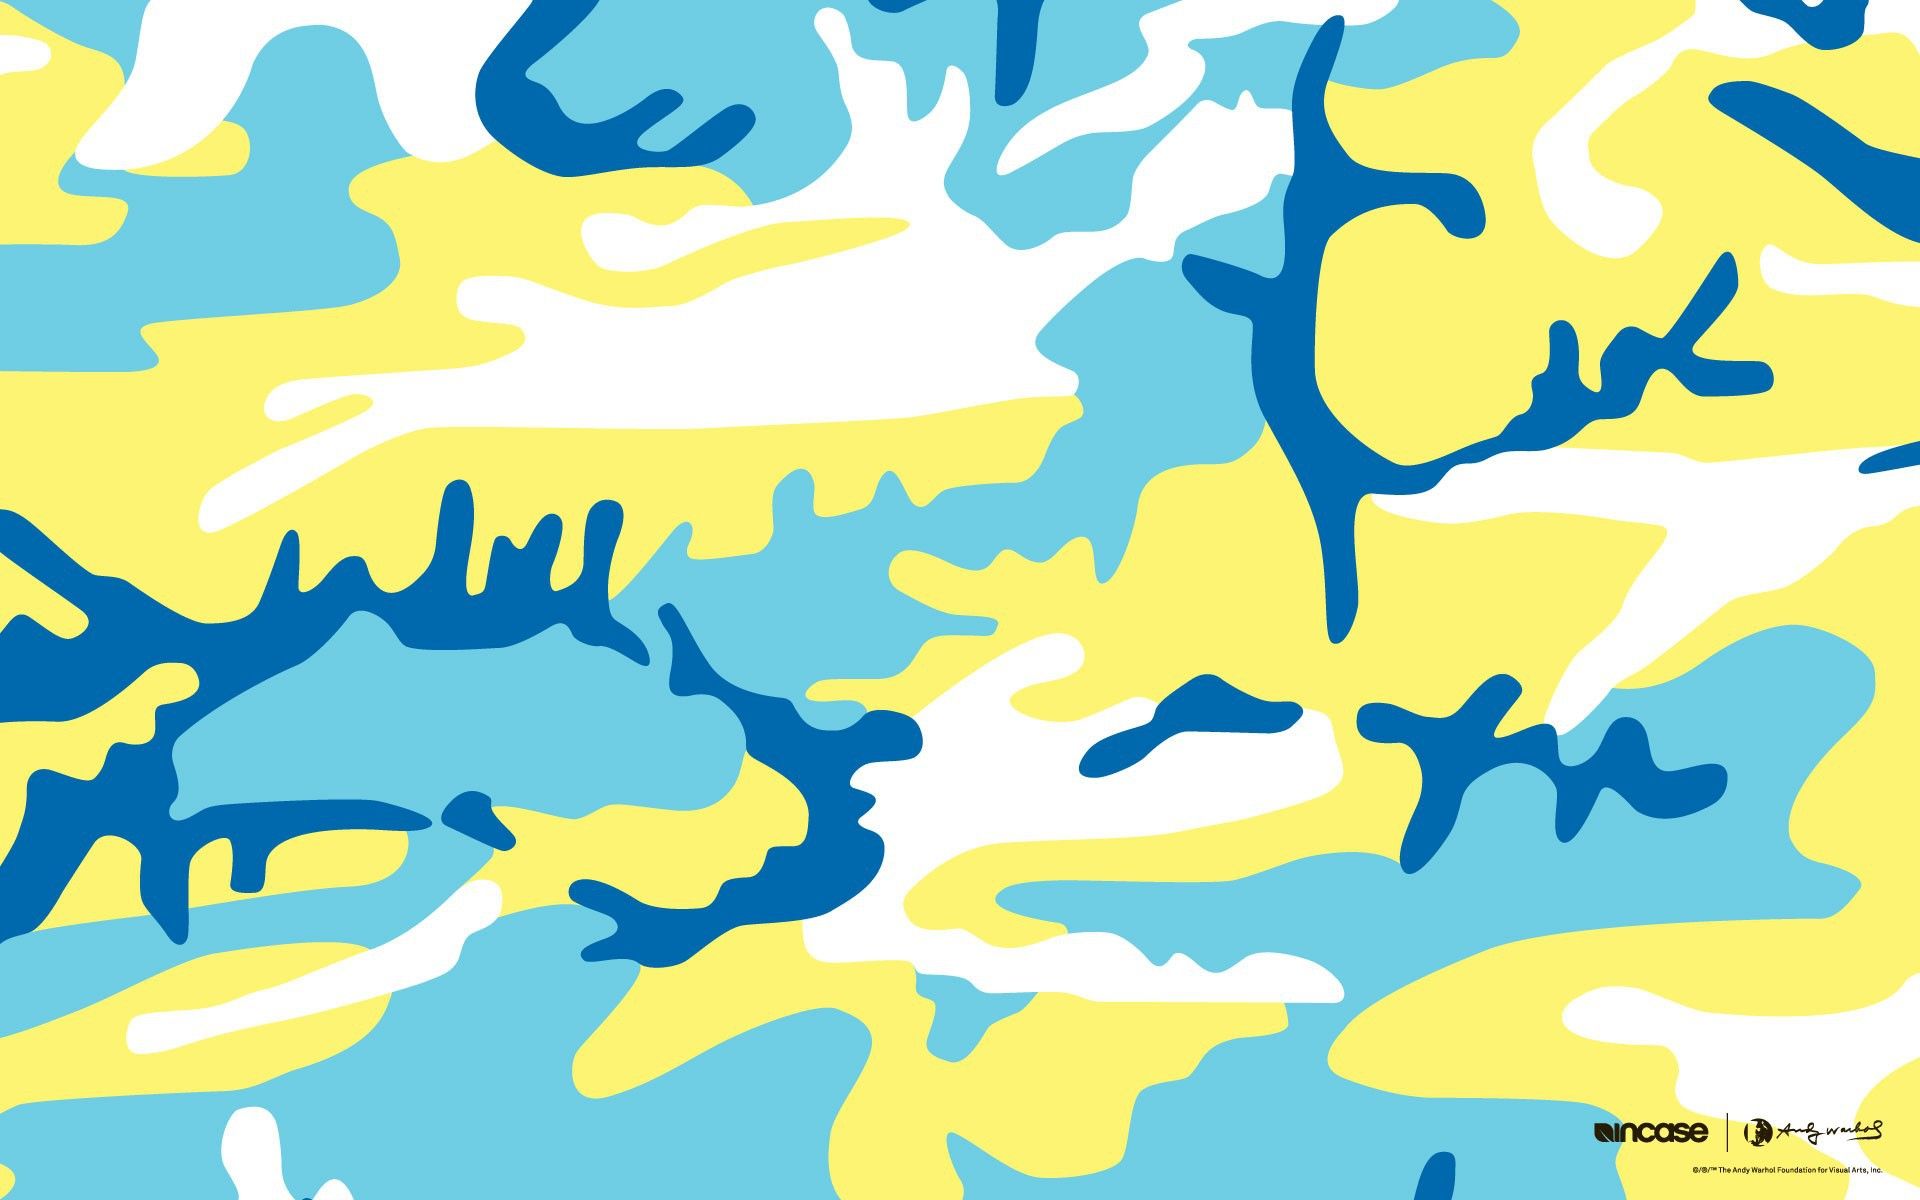 Painting Andy Warhol Camouflage wallpaper and image. Camouflage wallpaper, Camo wallpaper, Warhol art